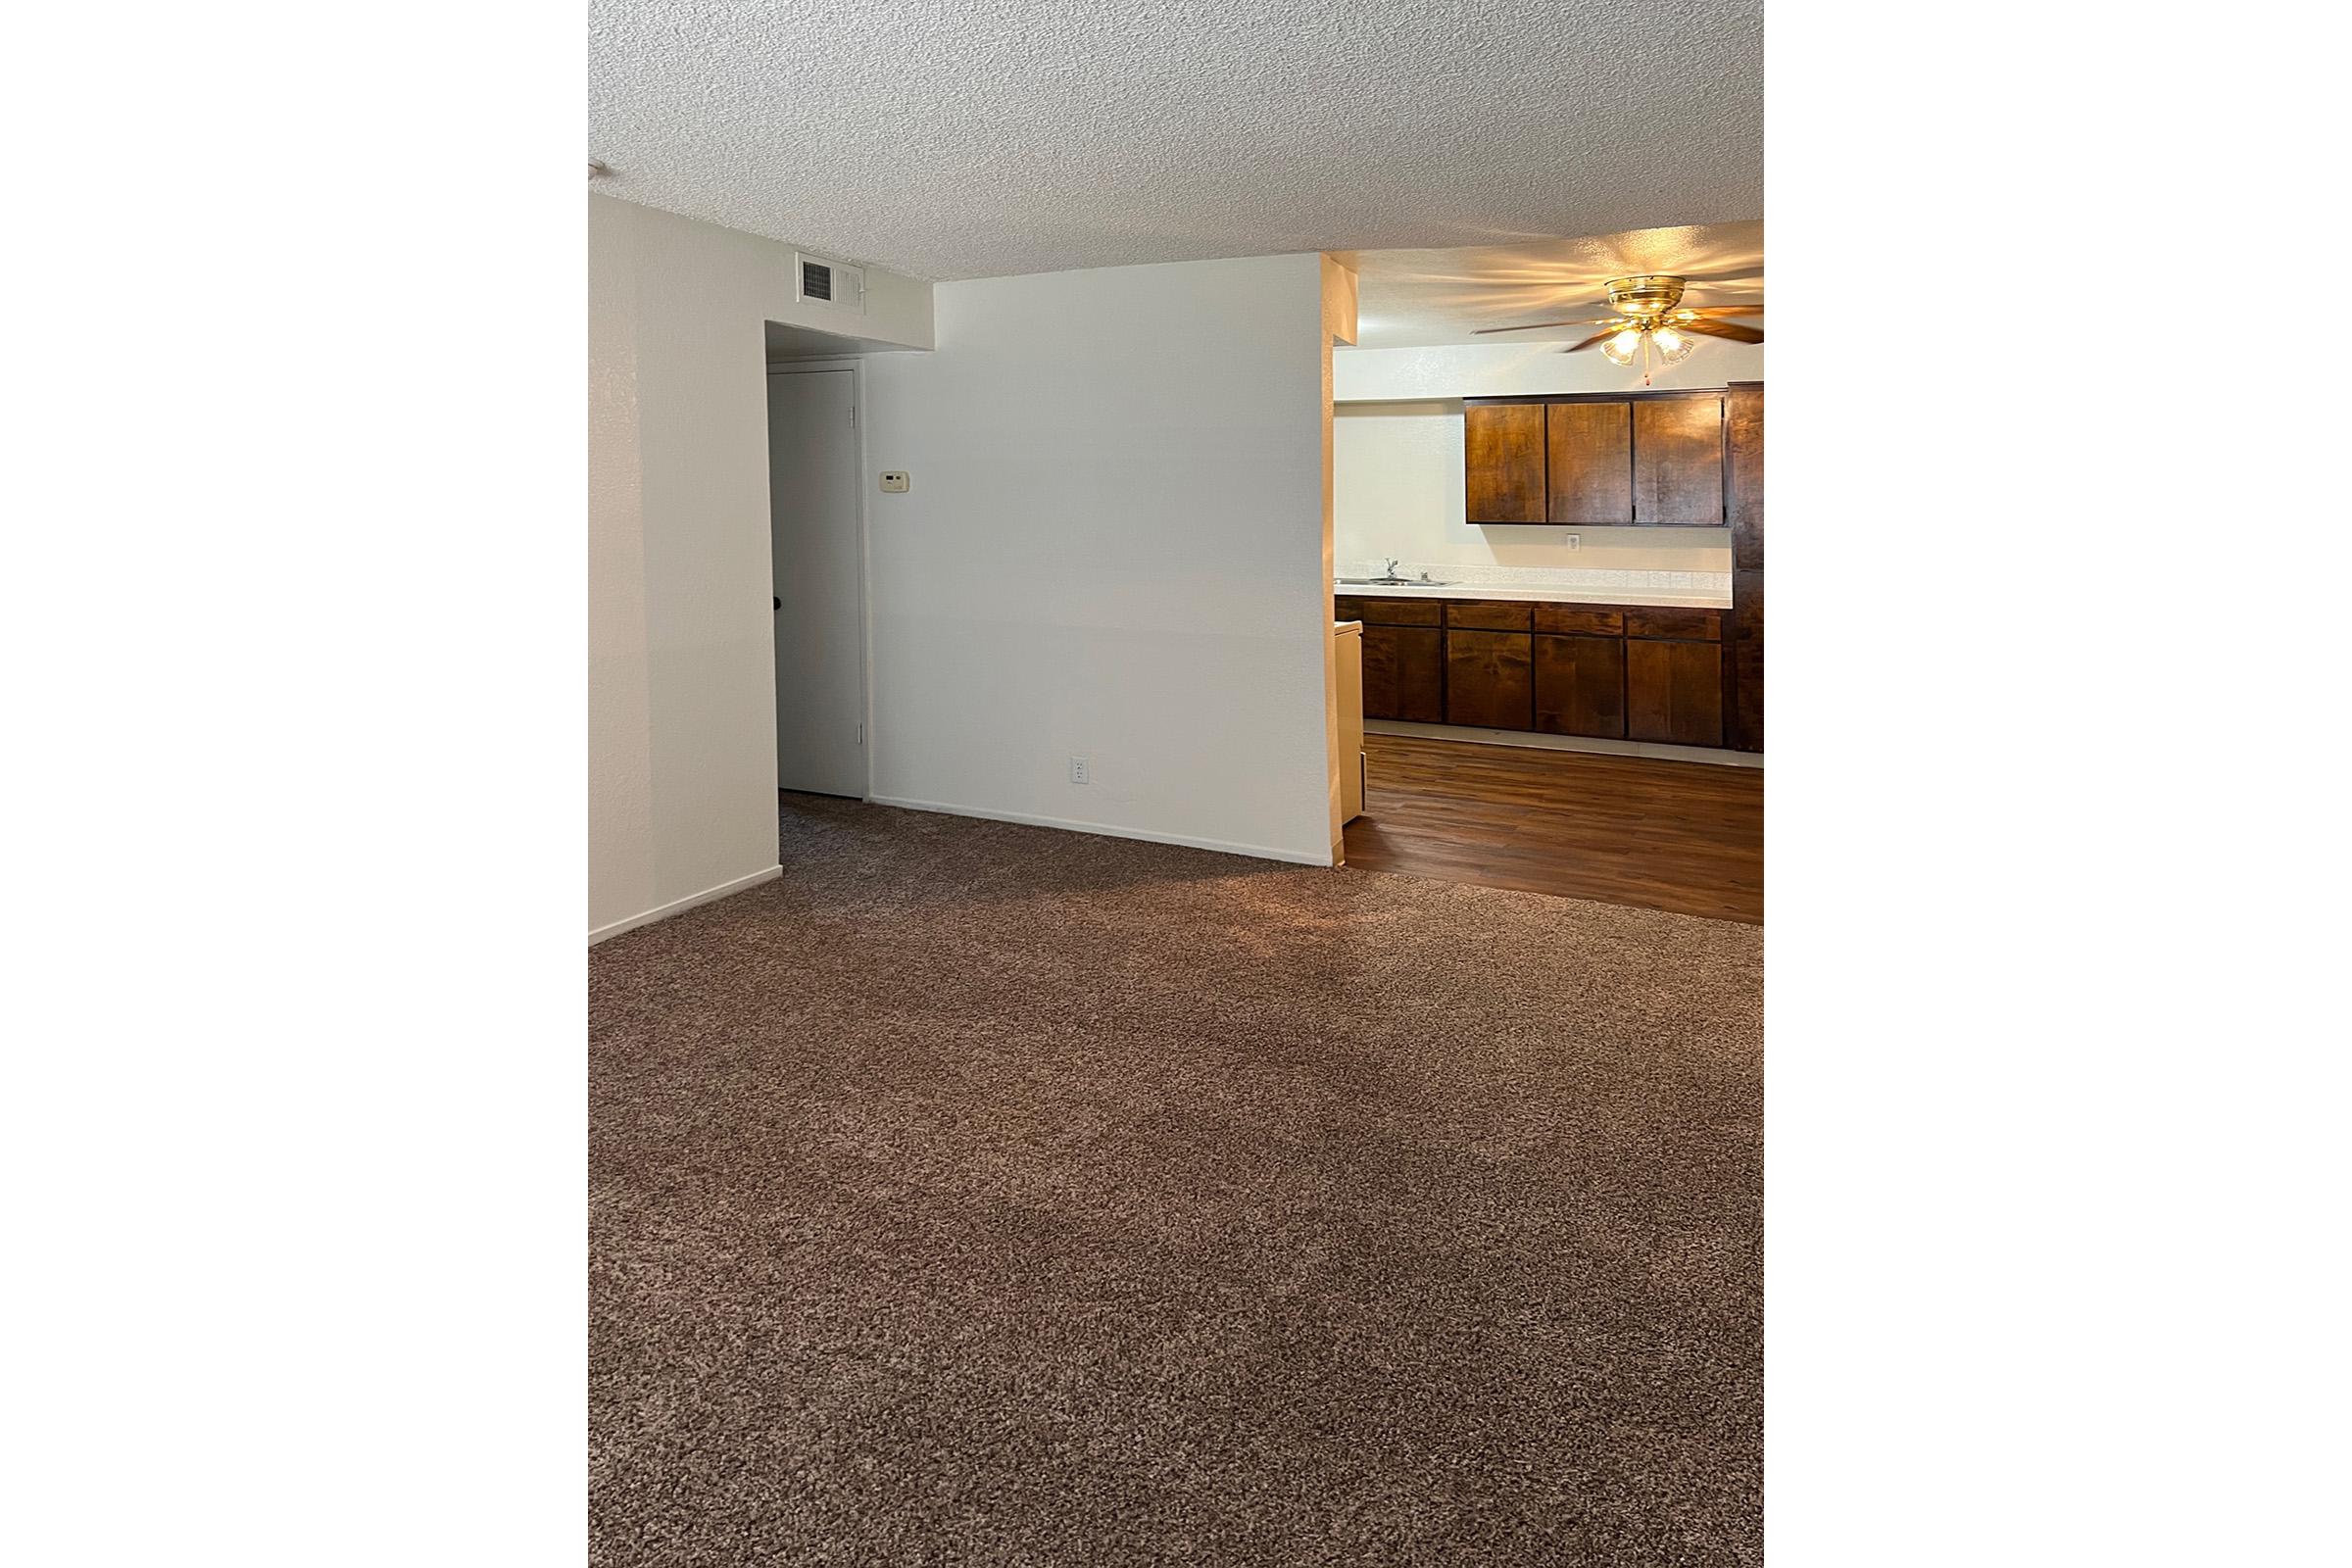 Vacant apartment with carpeting